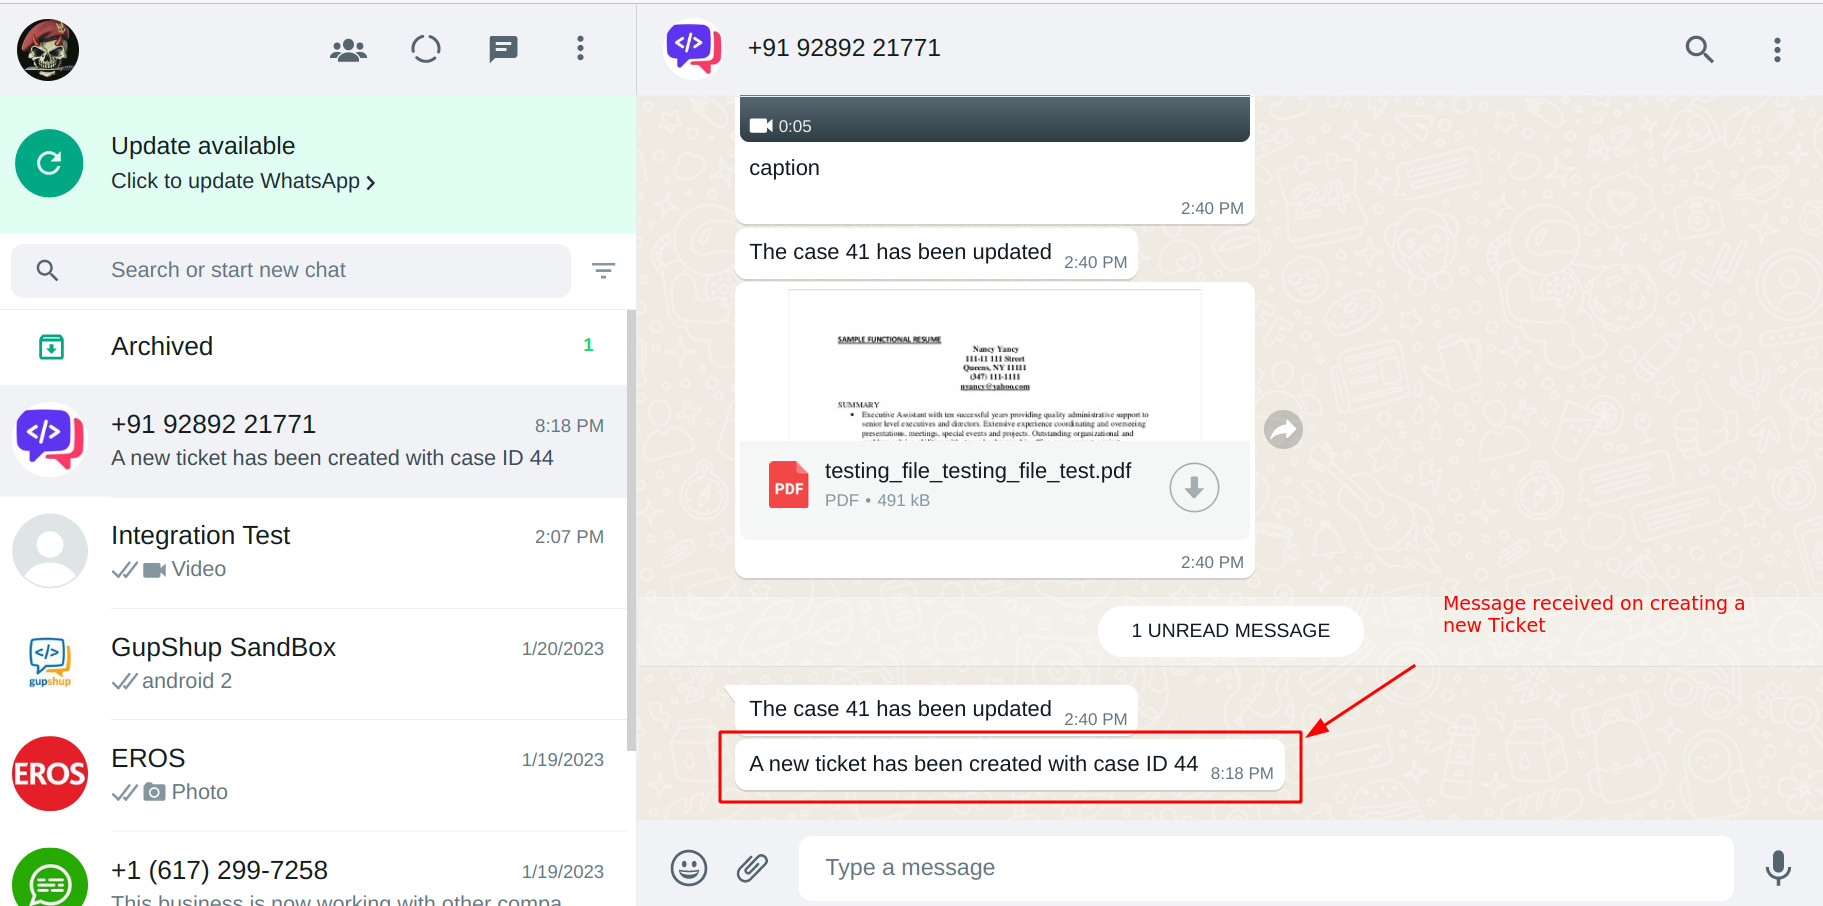 Customers receive a WhatsApp notification when a new ticket is created